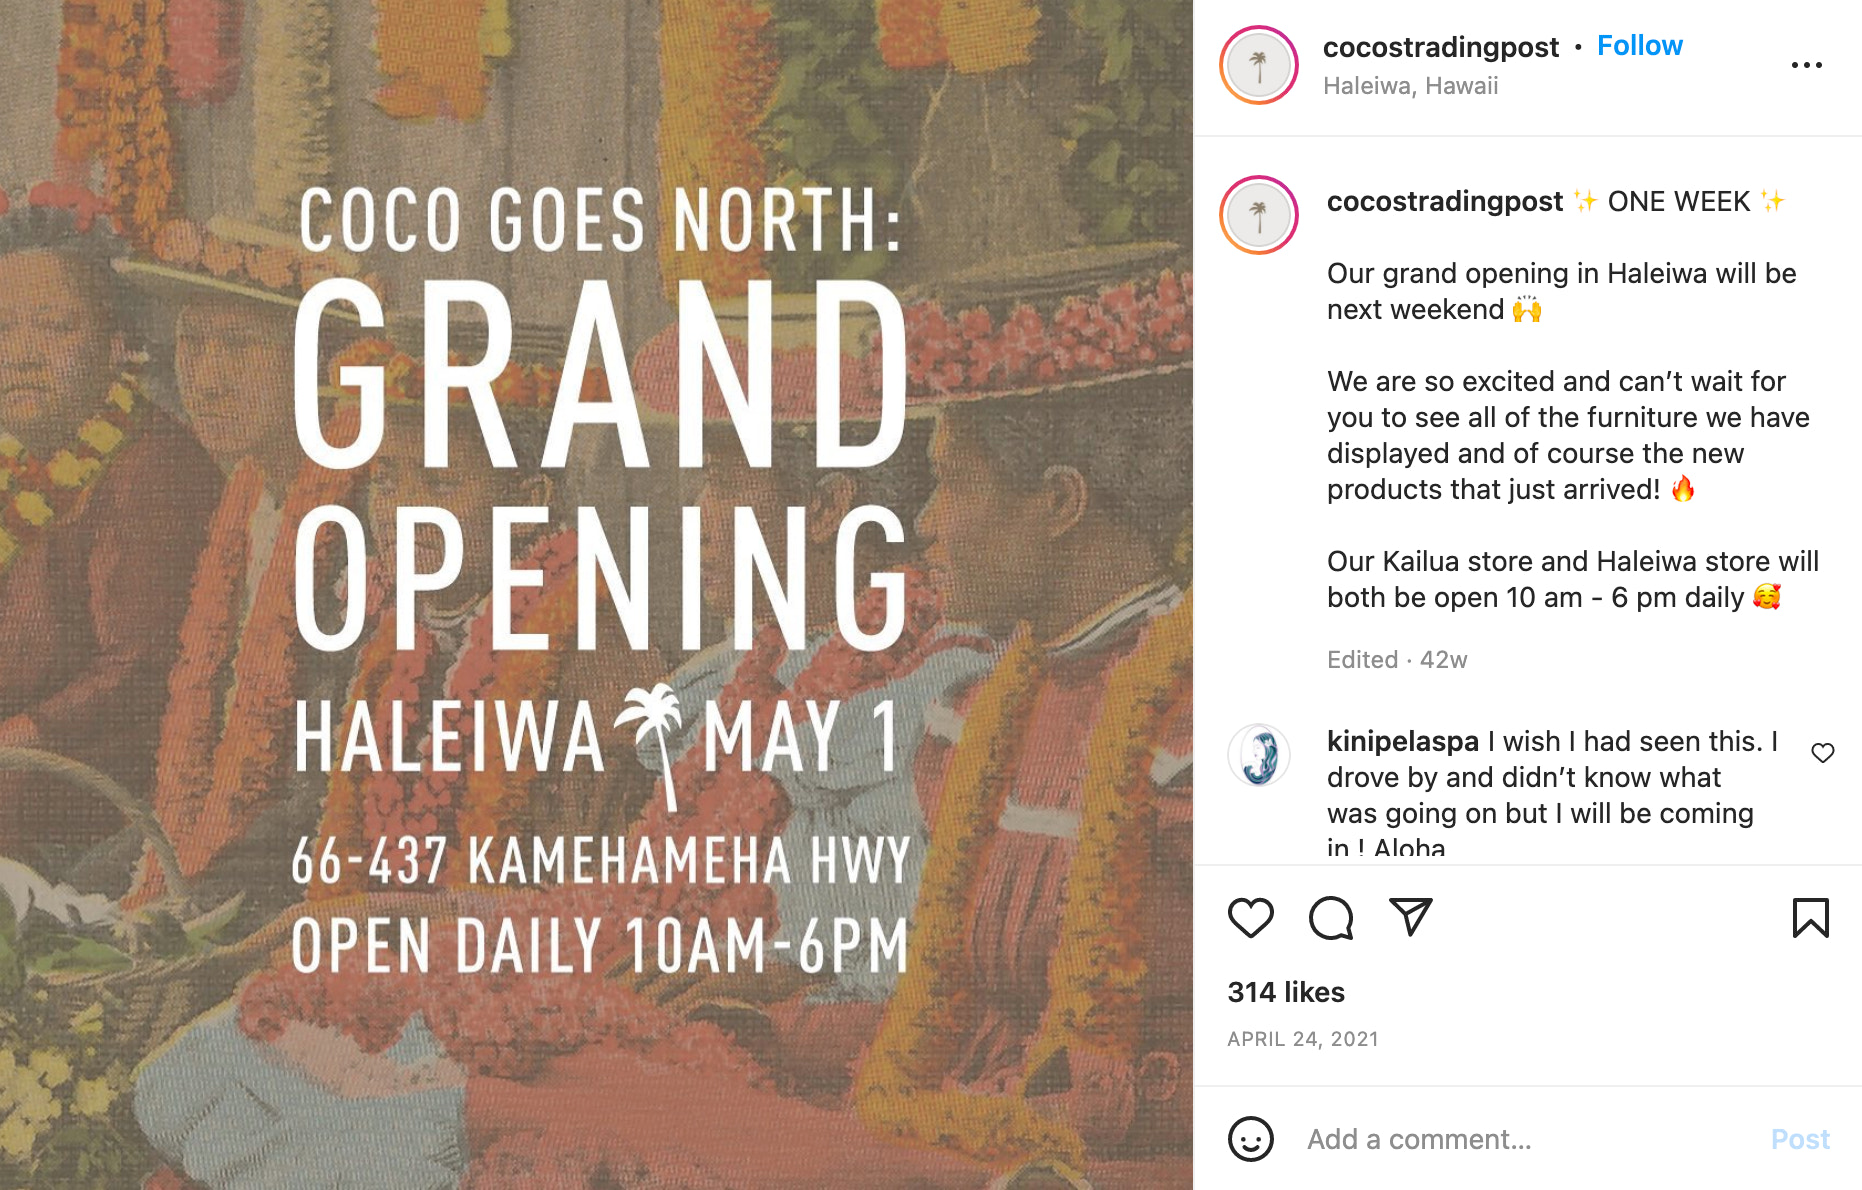 Screen grab of an instagram post by Coco's Trading Post counting down to its grand opening